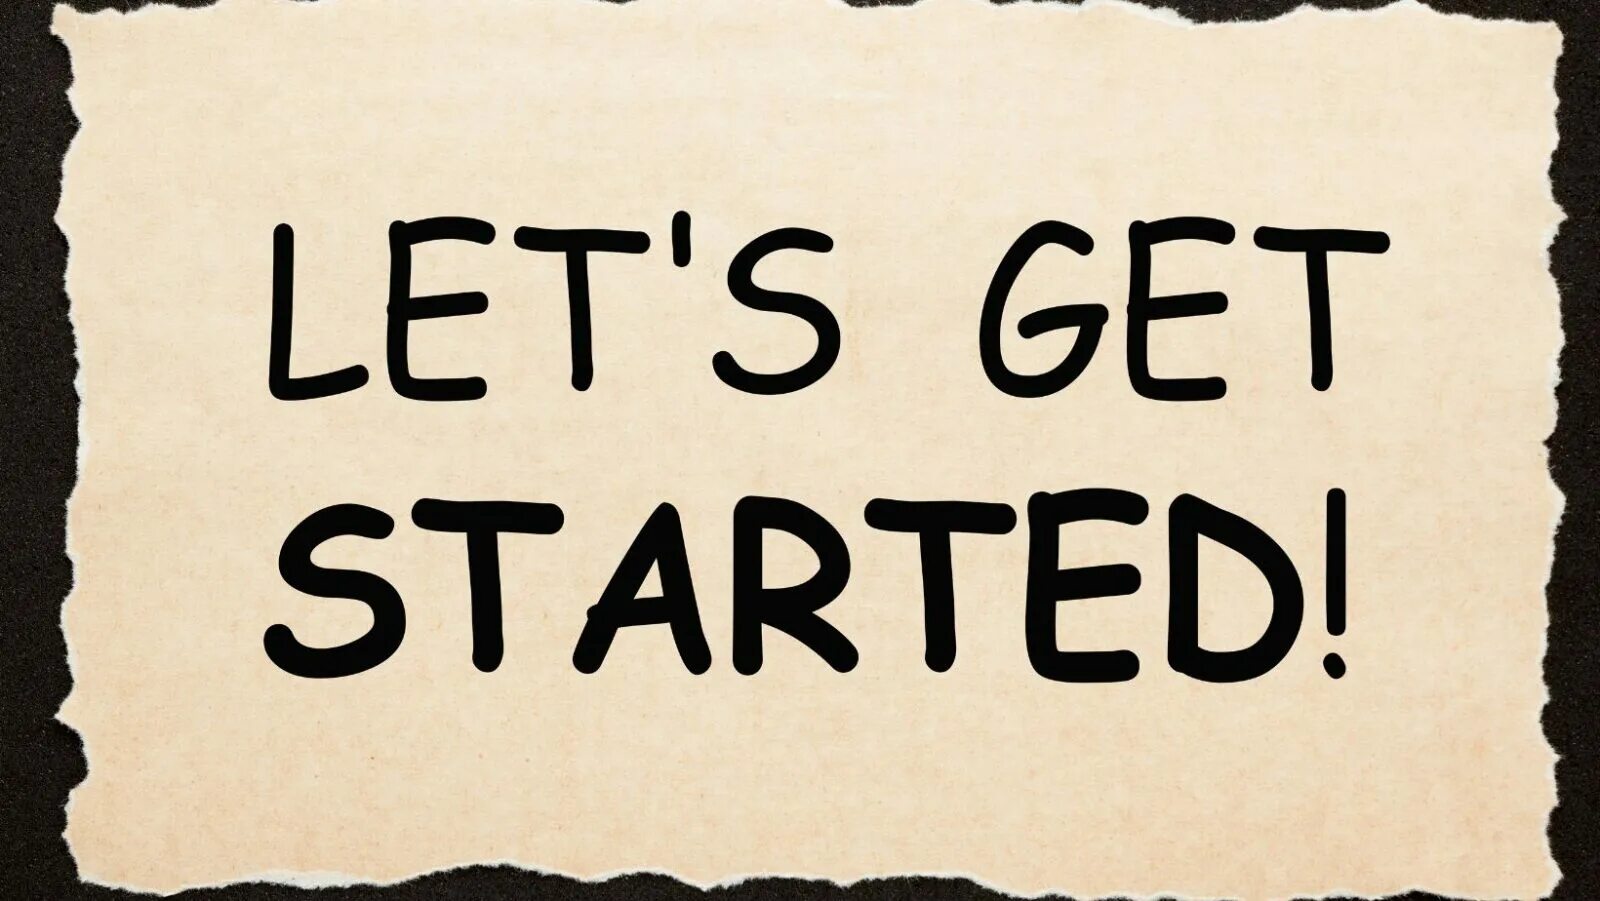 Let`s get started картинка. Let's get started Сток. Get started. Let's start фото. Lets get it done